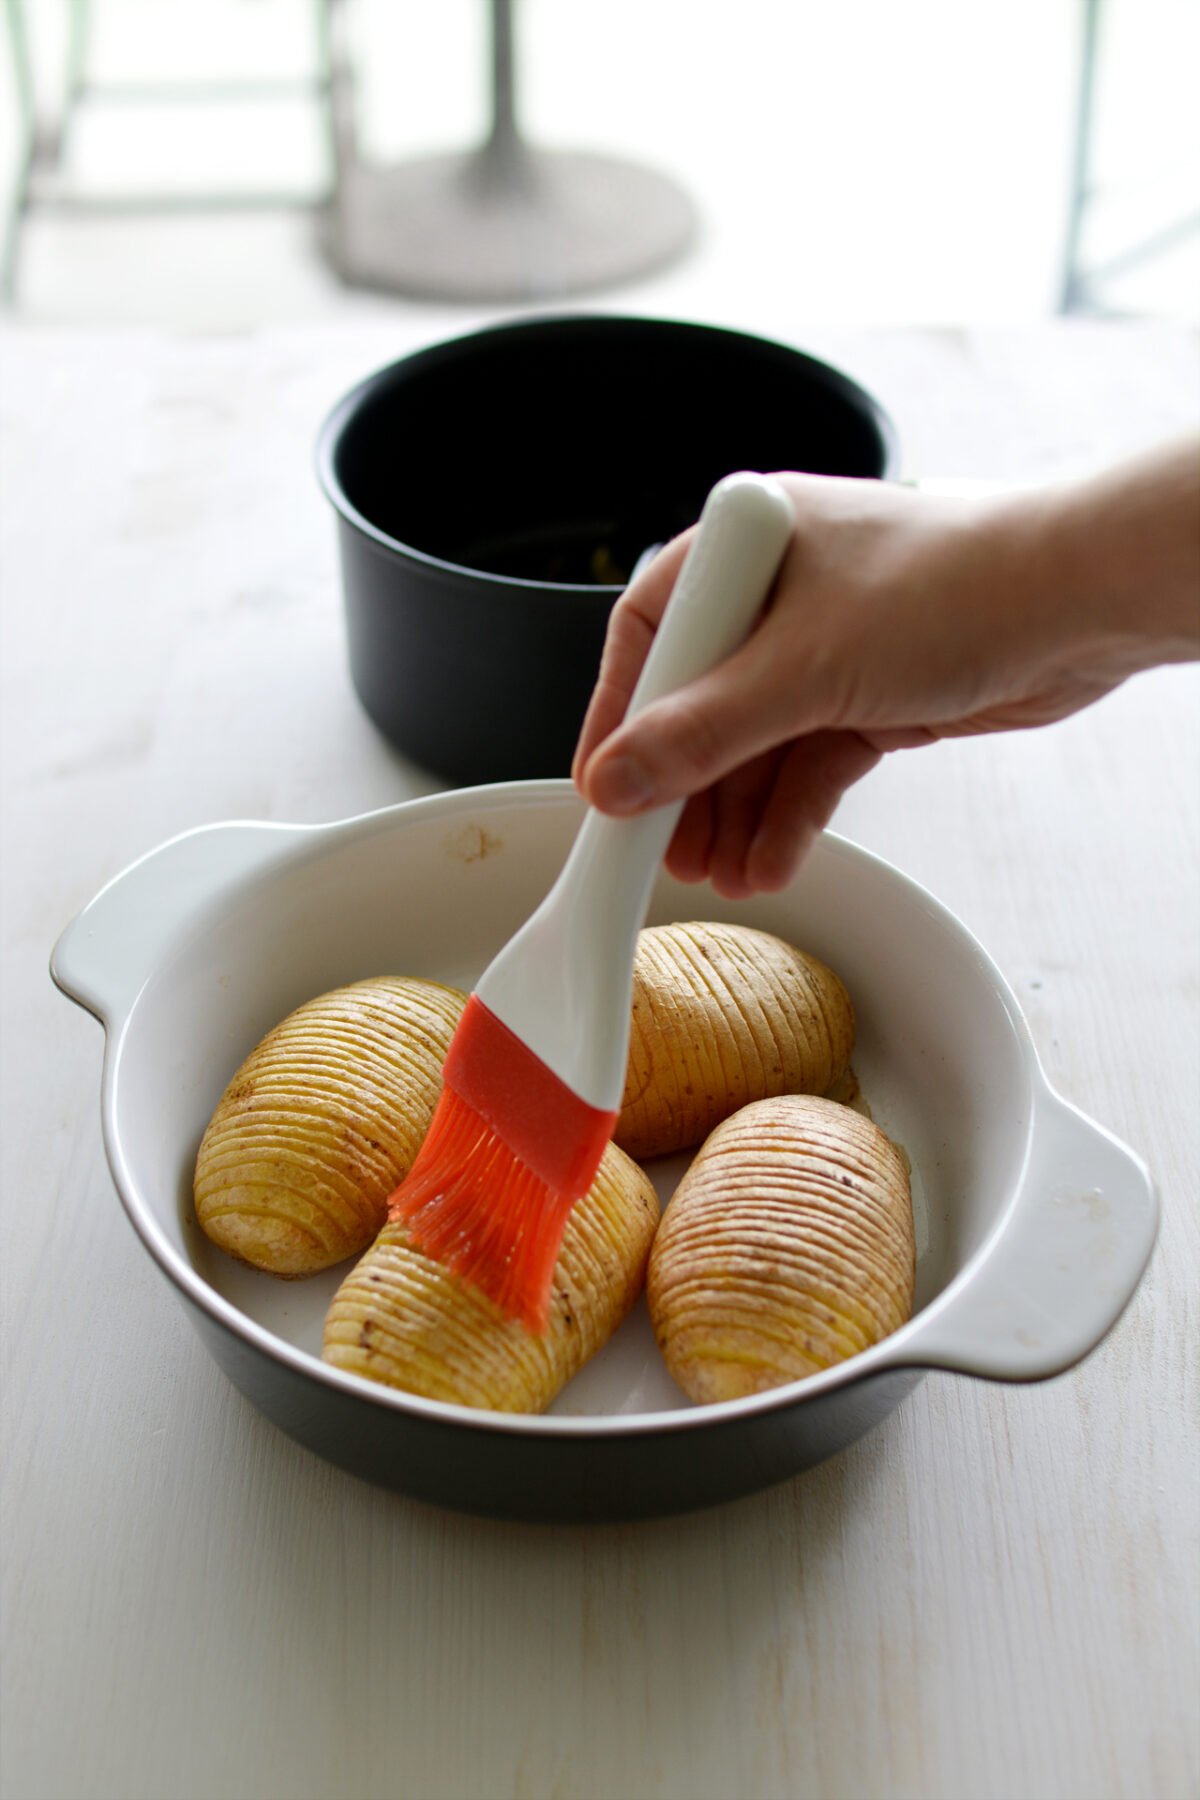 Sliced potatoes (Hasselback style) in a casserole dish with a woman's hand brushing on butter with a silicone brush.